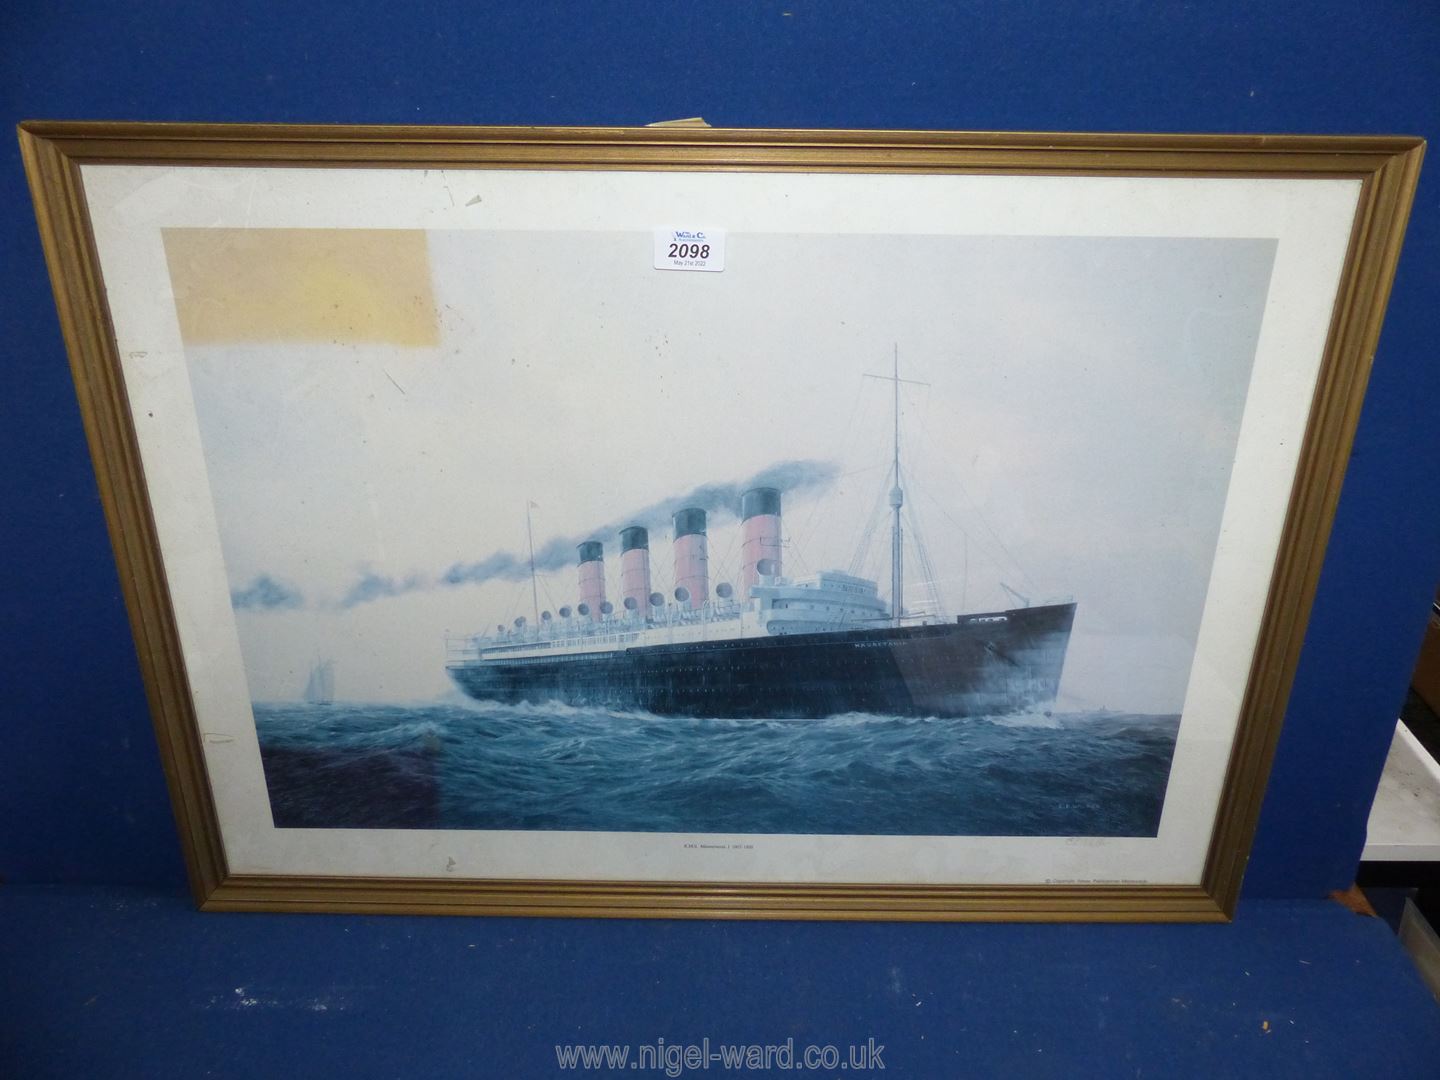 A signed print titled 'R.M.S Mauritania' 1907-1935 by E.D. Walker.